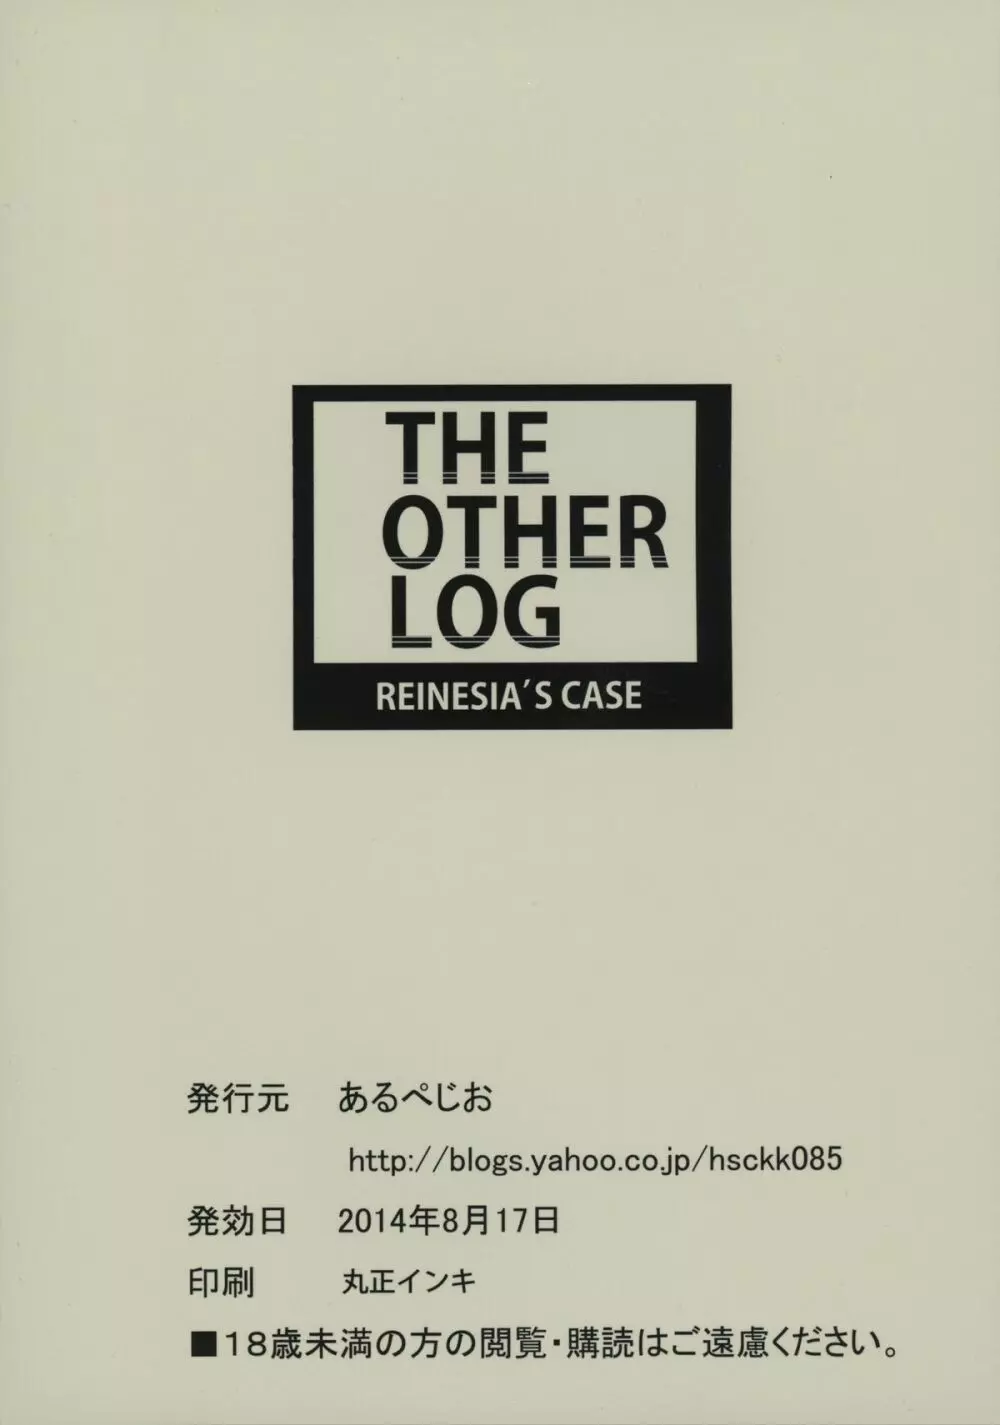 THE OTHER LOG REINESIA’S CASE 2ページ